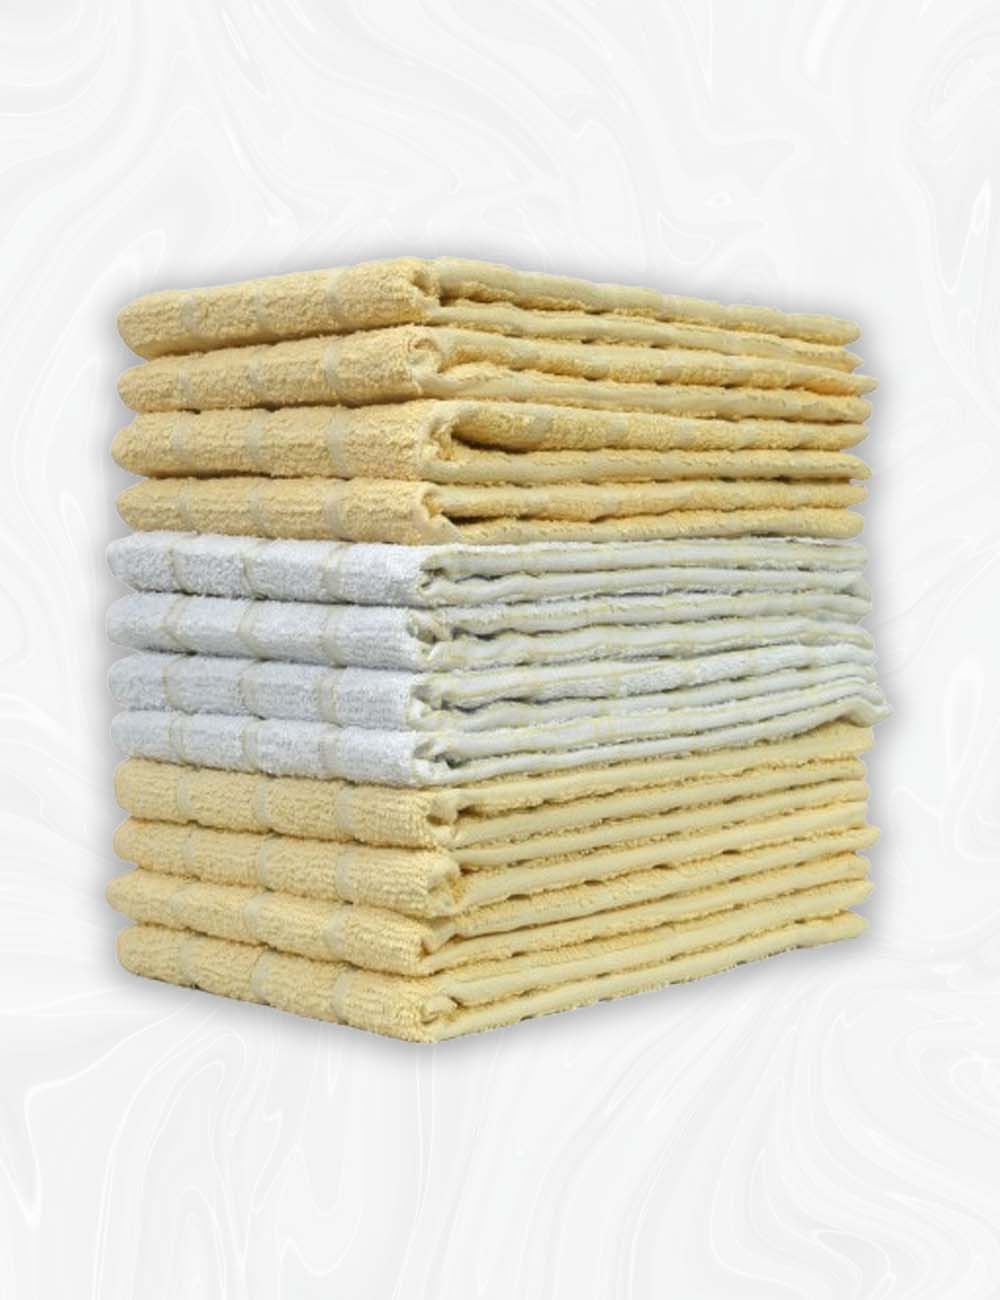 Home Labels Classic Kitchen Towel 12 Pack, 15 x 25 Inches, 100% Ring Spun Cotton Super Soft and Absorbent Linen Dish Towels, Tea Bar Set (Beige)